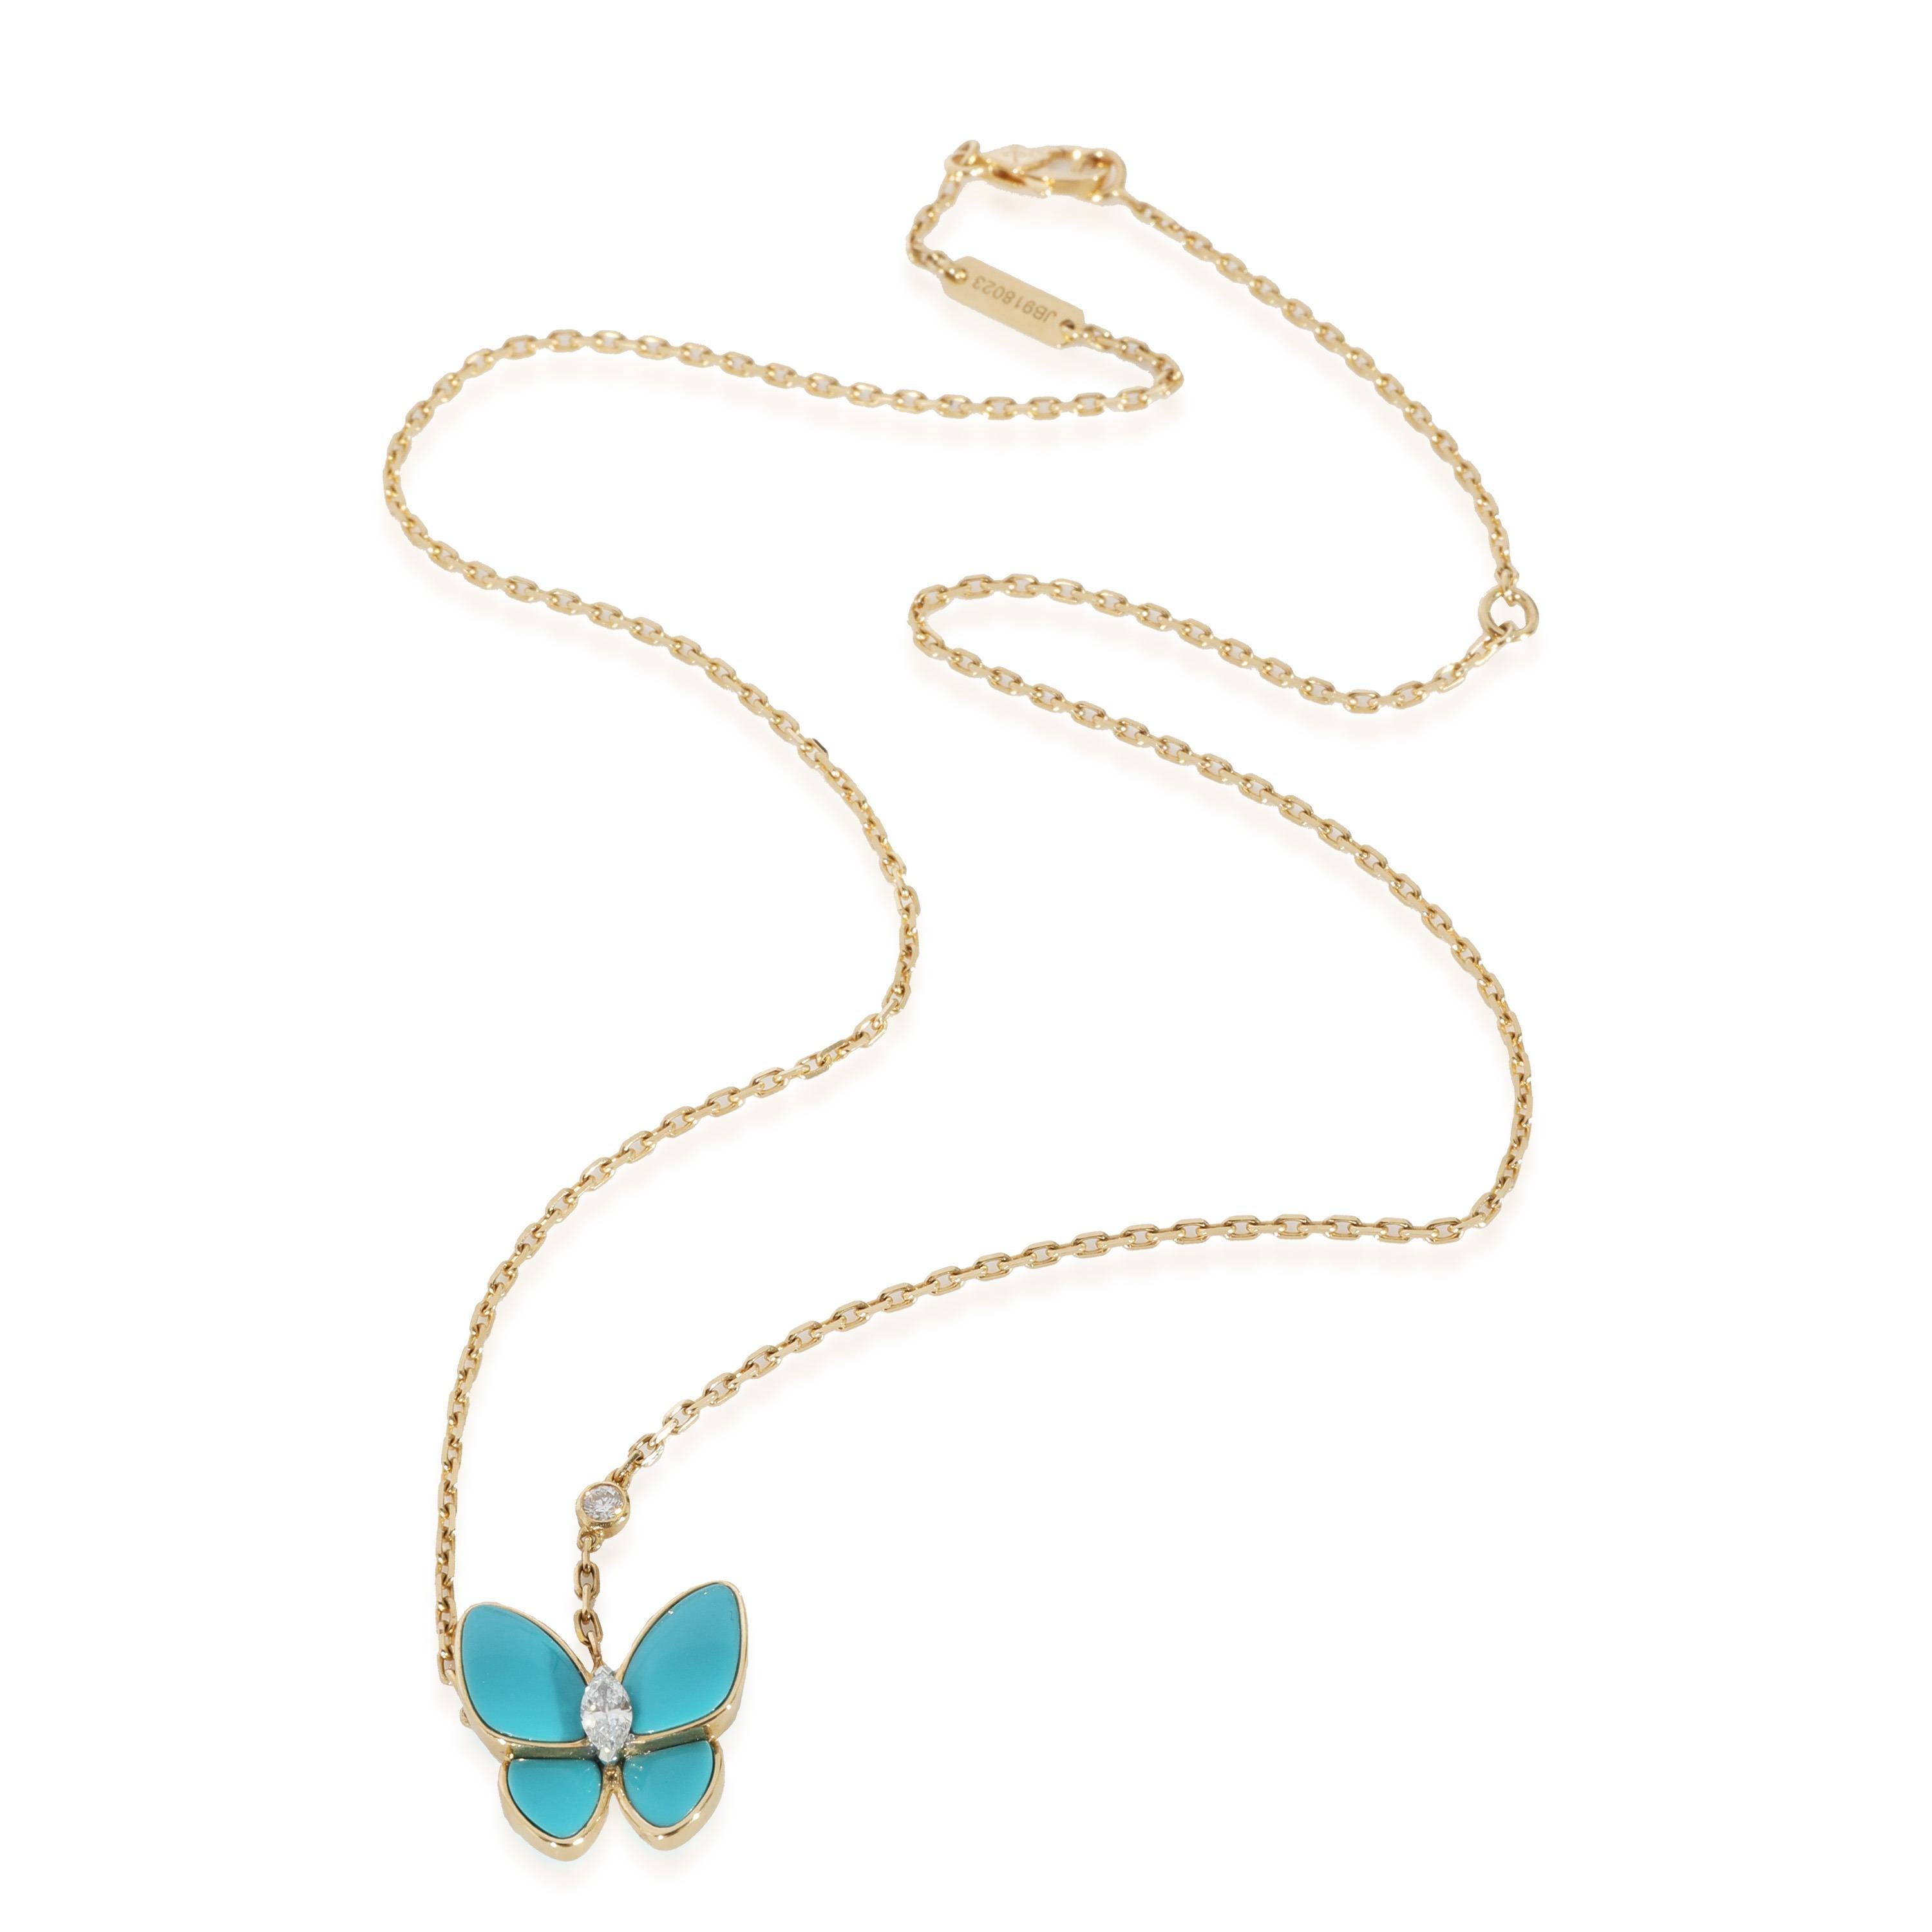 Van Cleef & Arpels Two Butterfly Pendant With Diamond & Turquoise  0.19 CTW

PRIMARY DETAILS
SKU: 129657
Listing Title: Van Cleef & Arpels Two Butterfly Pendant With Diamond & Turquoise  0.19 CTW
Condition Description: Van Cleef & Arpels has long